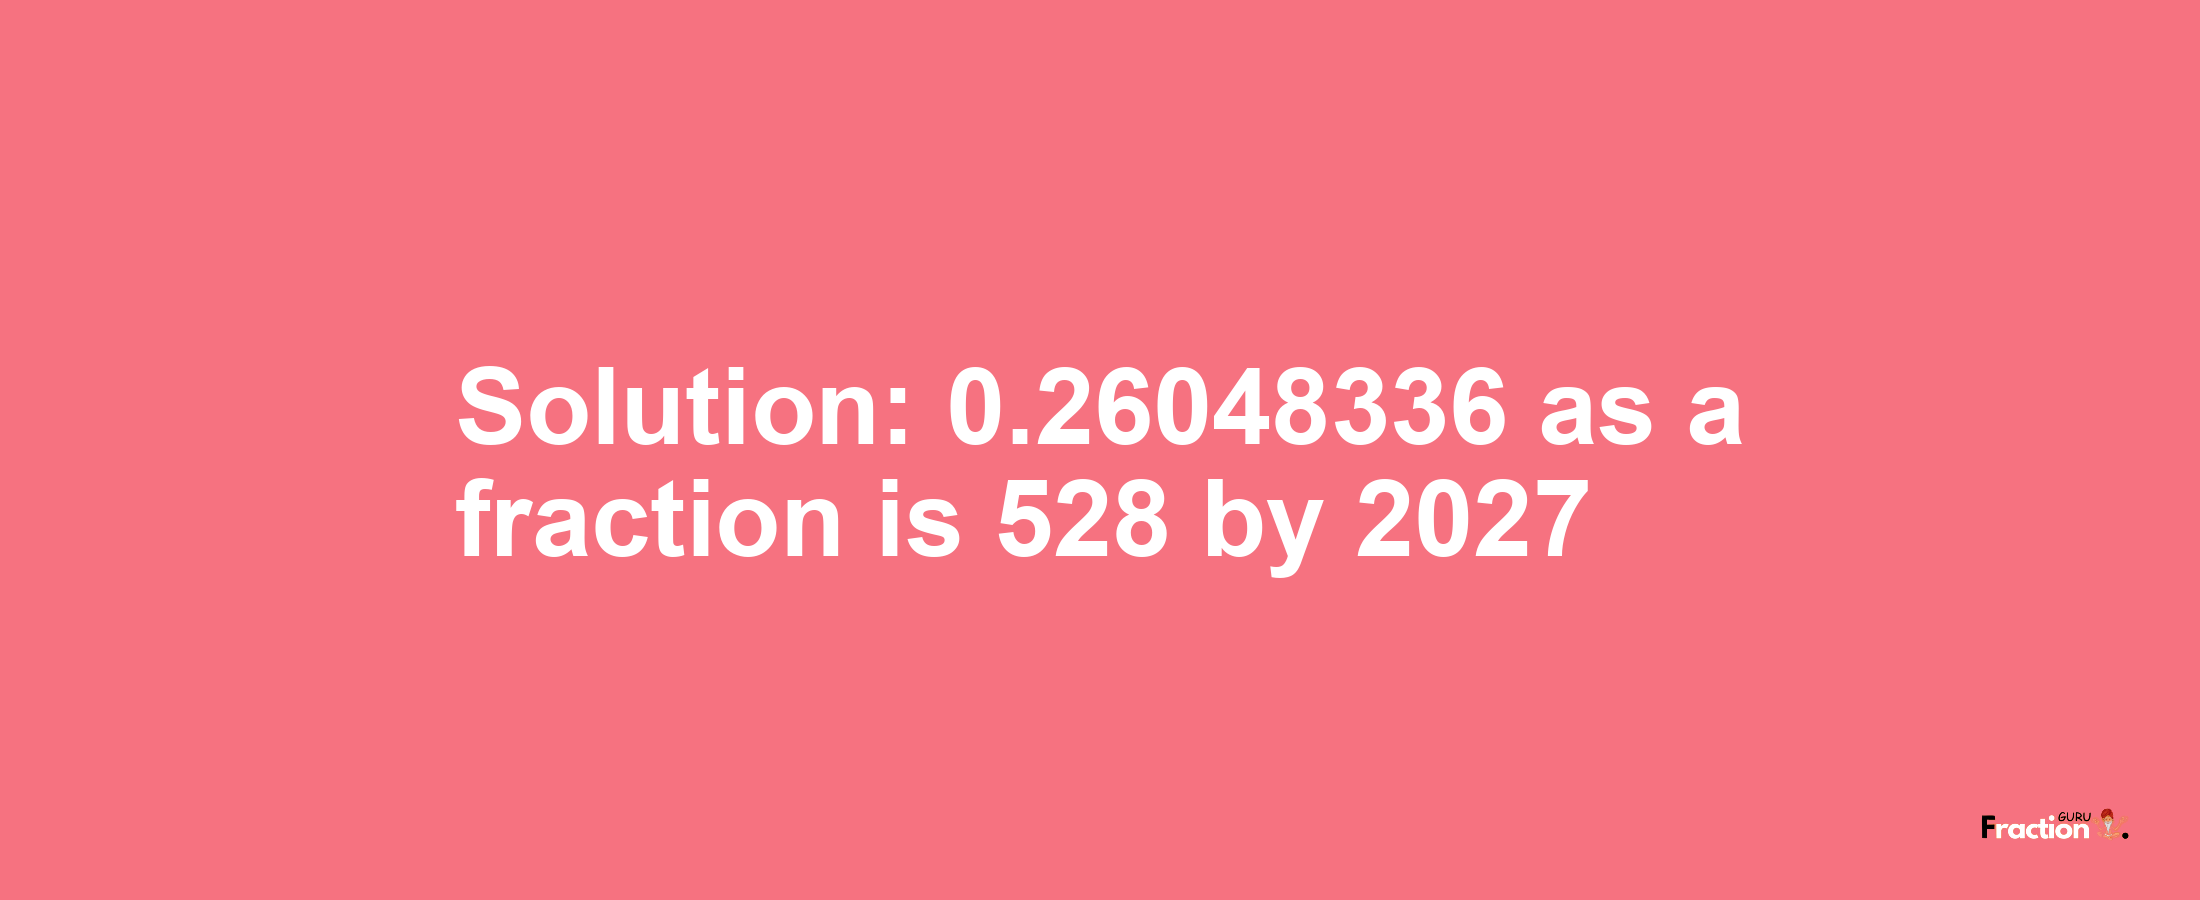 Solution:0.26048336 as a fraction is 528/2027